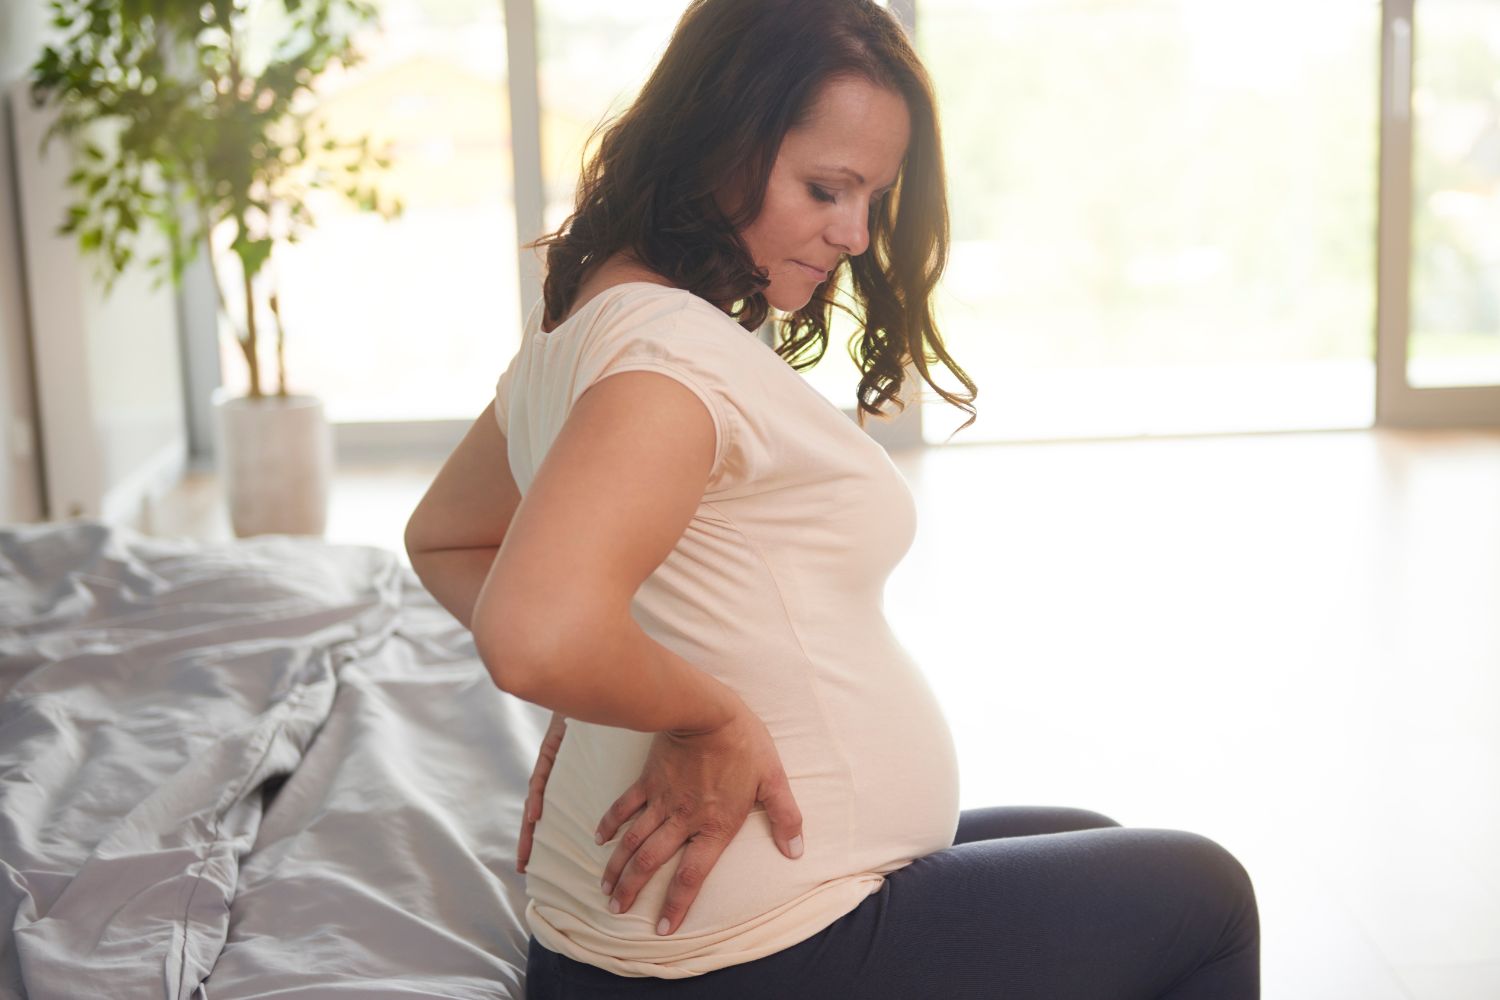 Is back pain common after pregnancy?